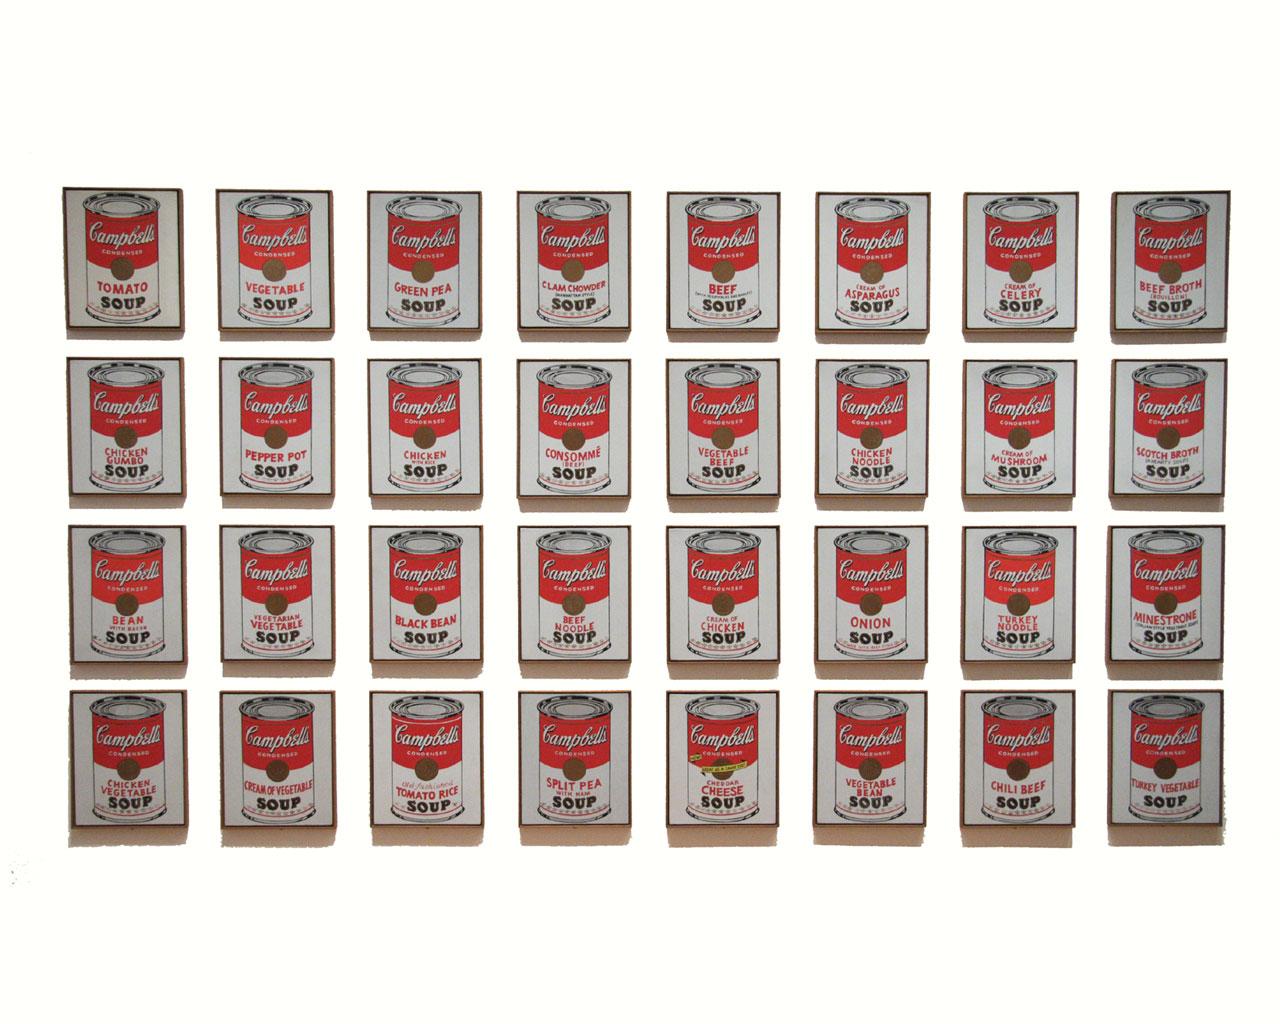 Andy Warhol - Campbell's Soup Cans (1962) Wallpaper #2 1280 x 1024 